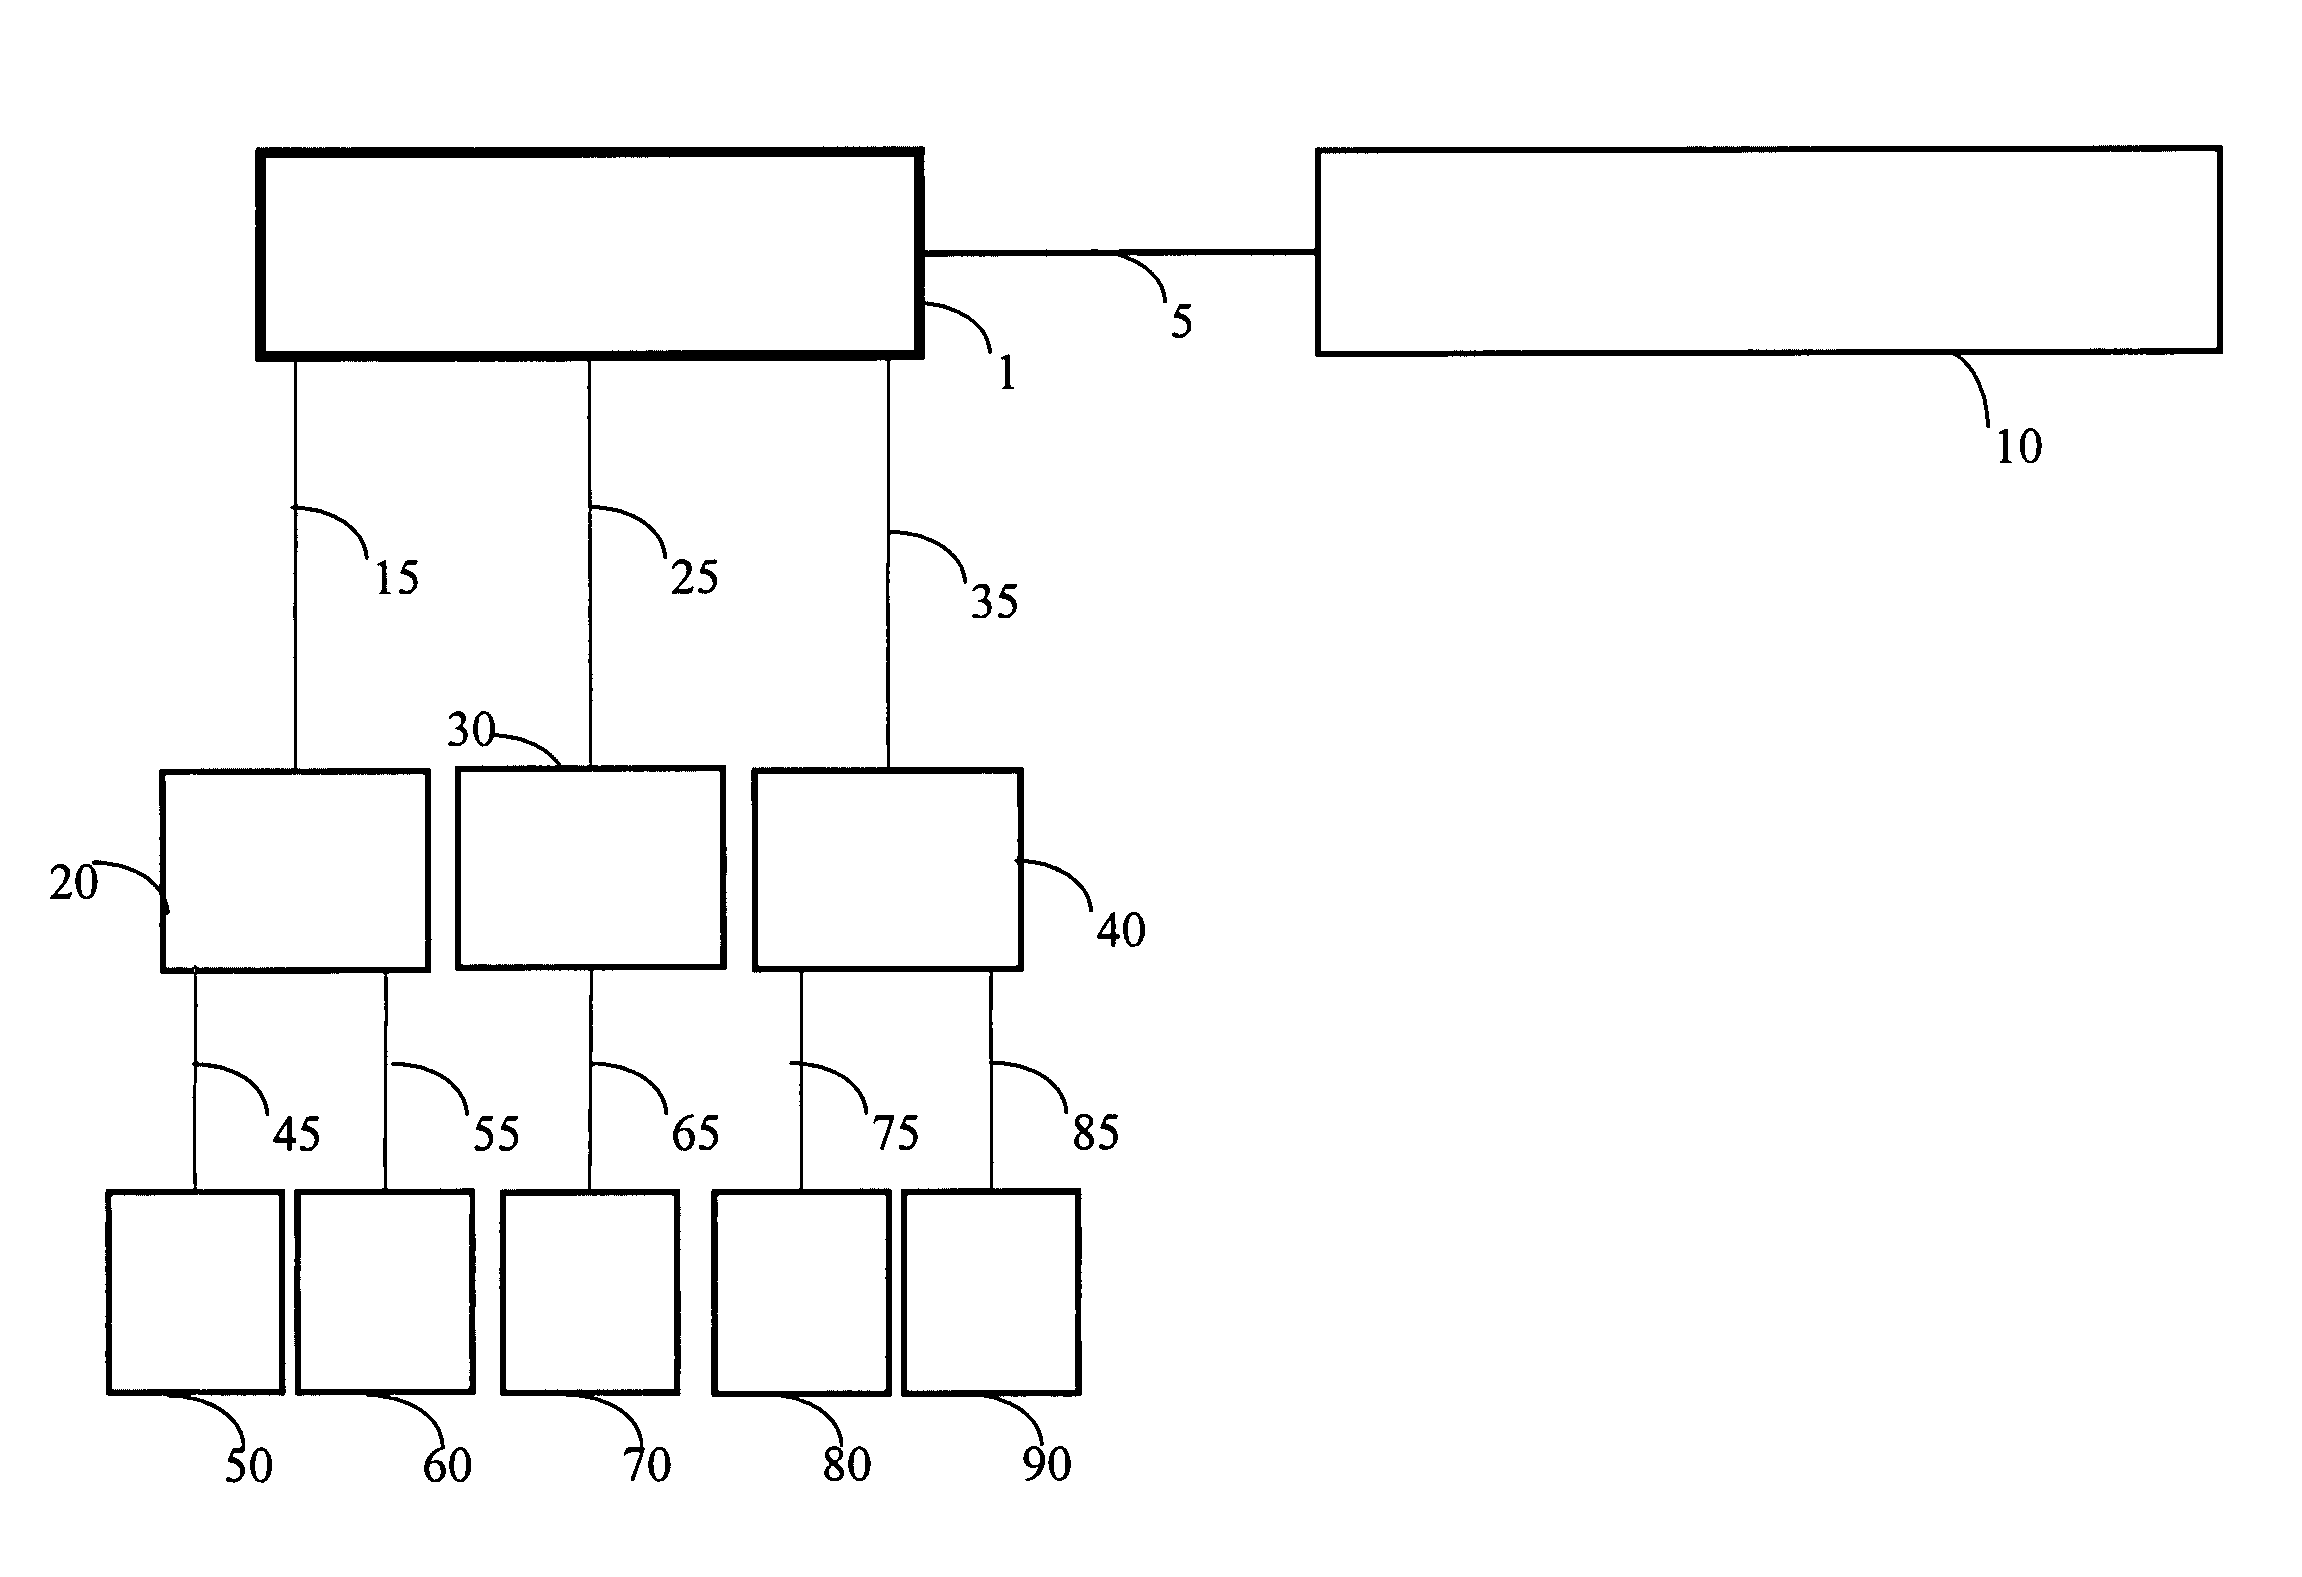 Session bean implementation of a system, method and software for creating or maintaining distributed transparent persistence of complex data objects and their data relationships